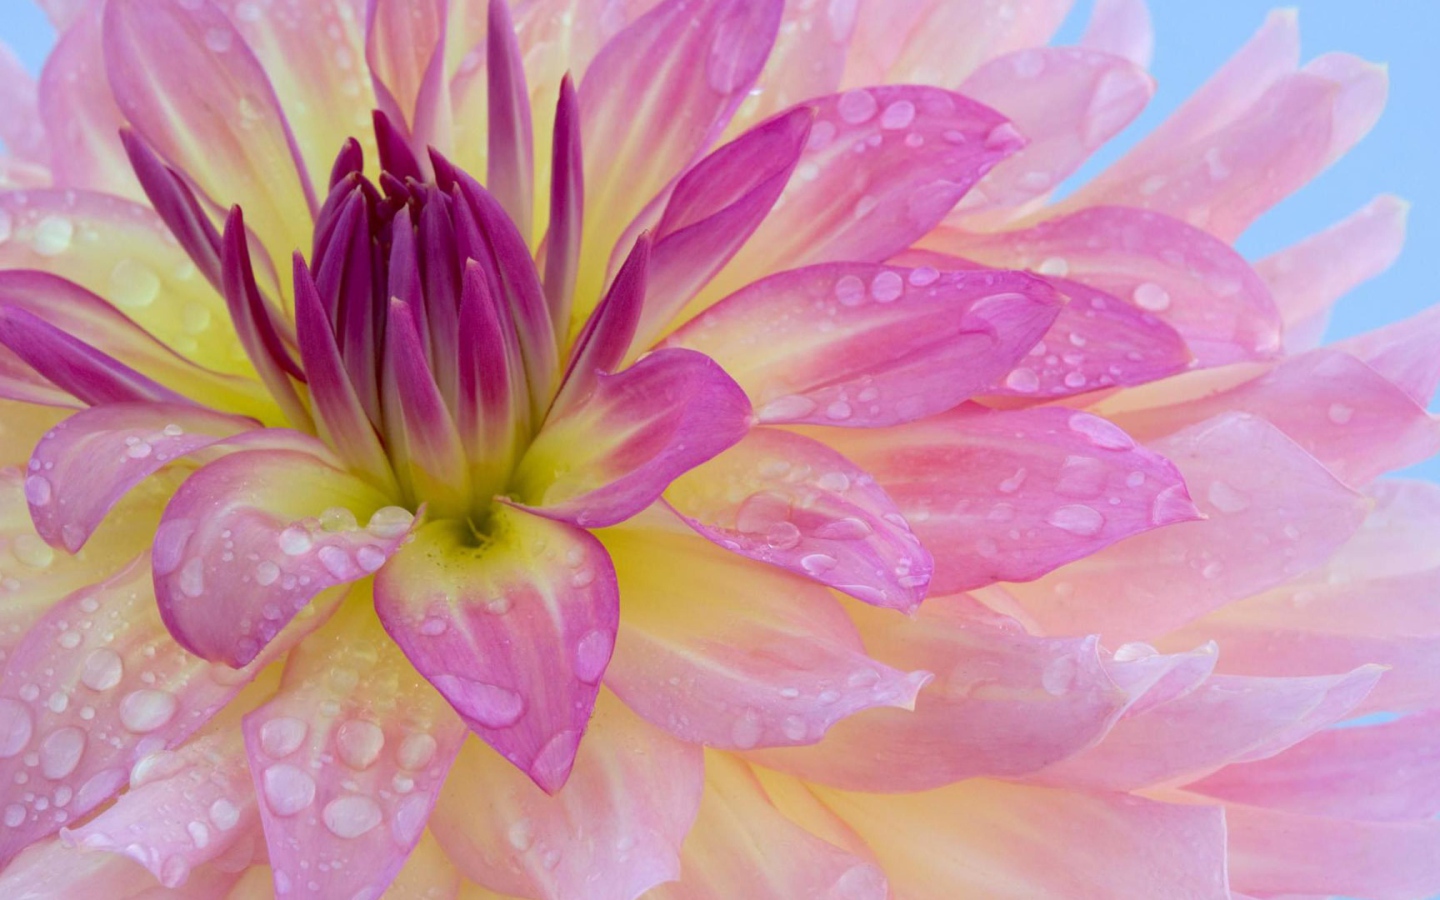 Pink dahlia with water droplets on petals close-up